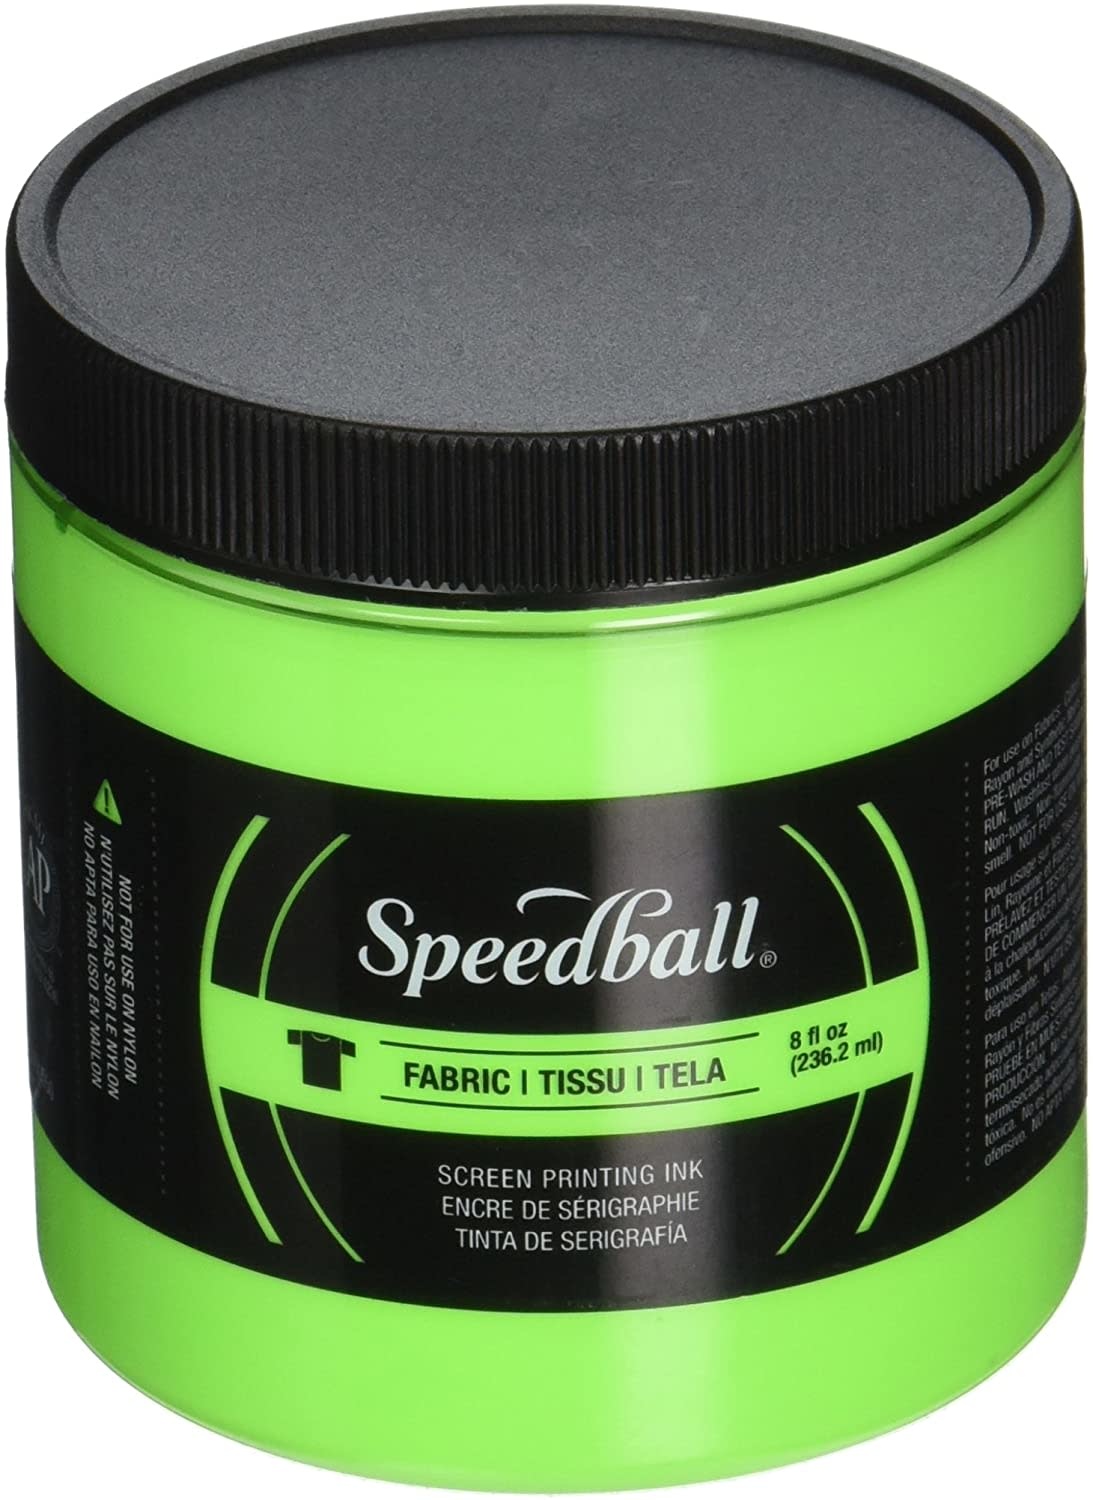 Speedball Fluorescent Screen Printing Ink Lime Green 8oz - MICA Store